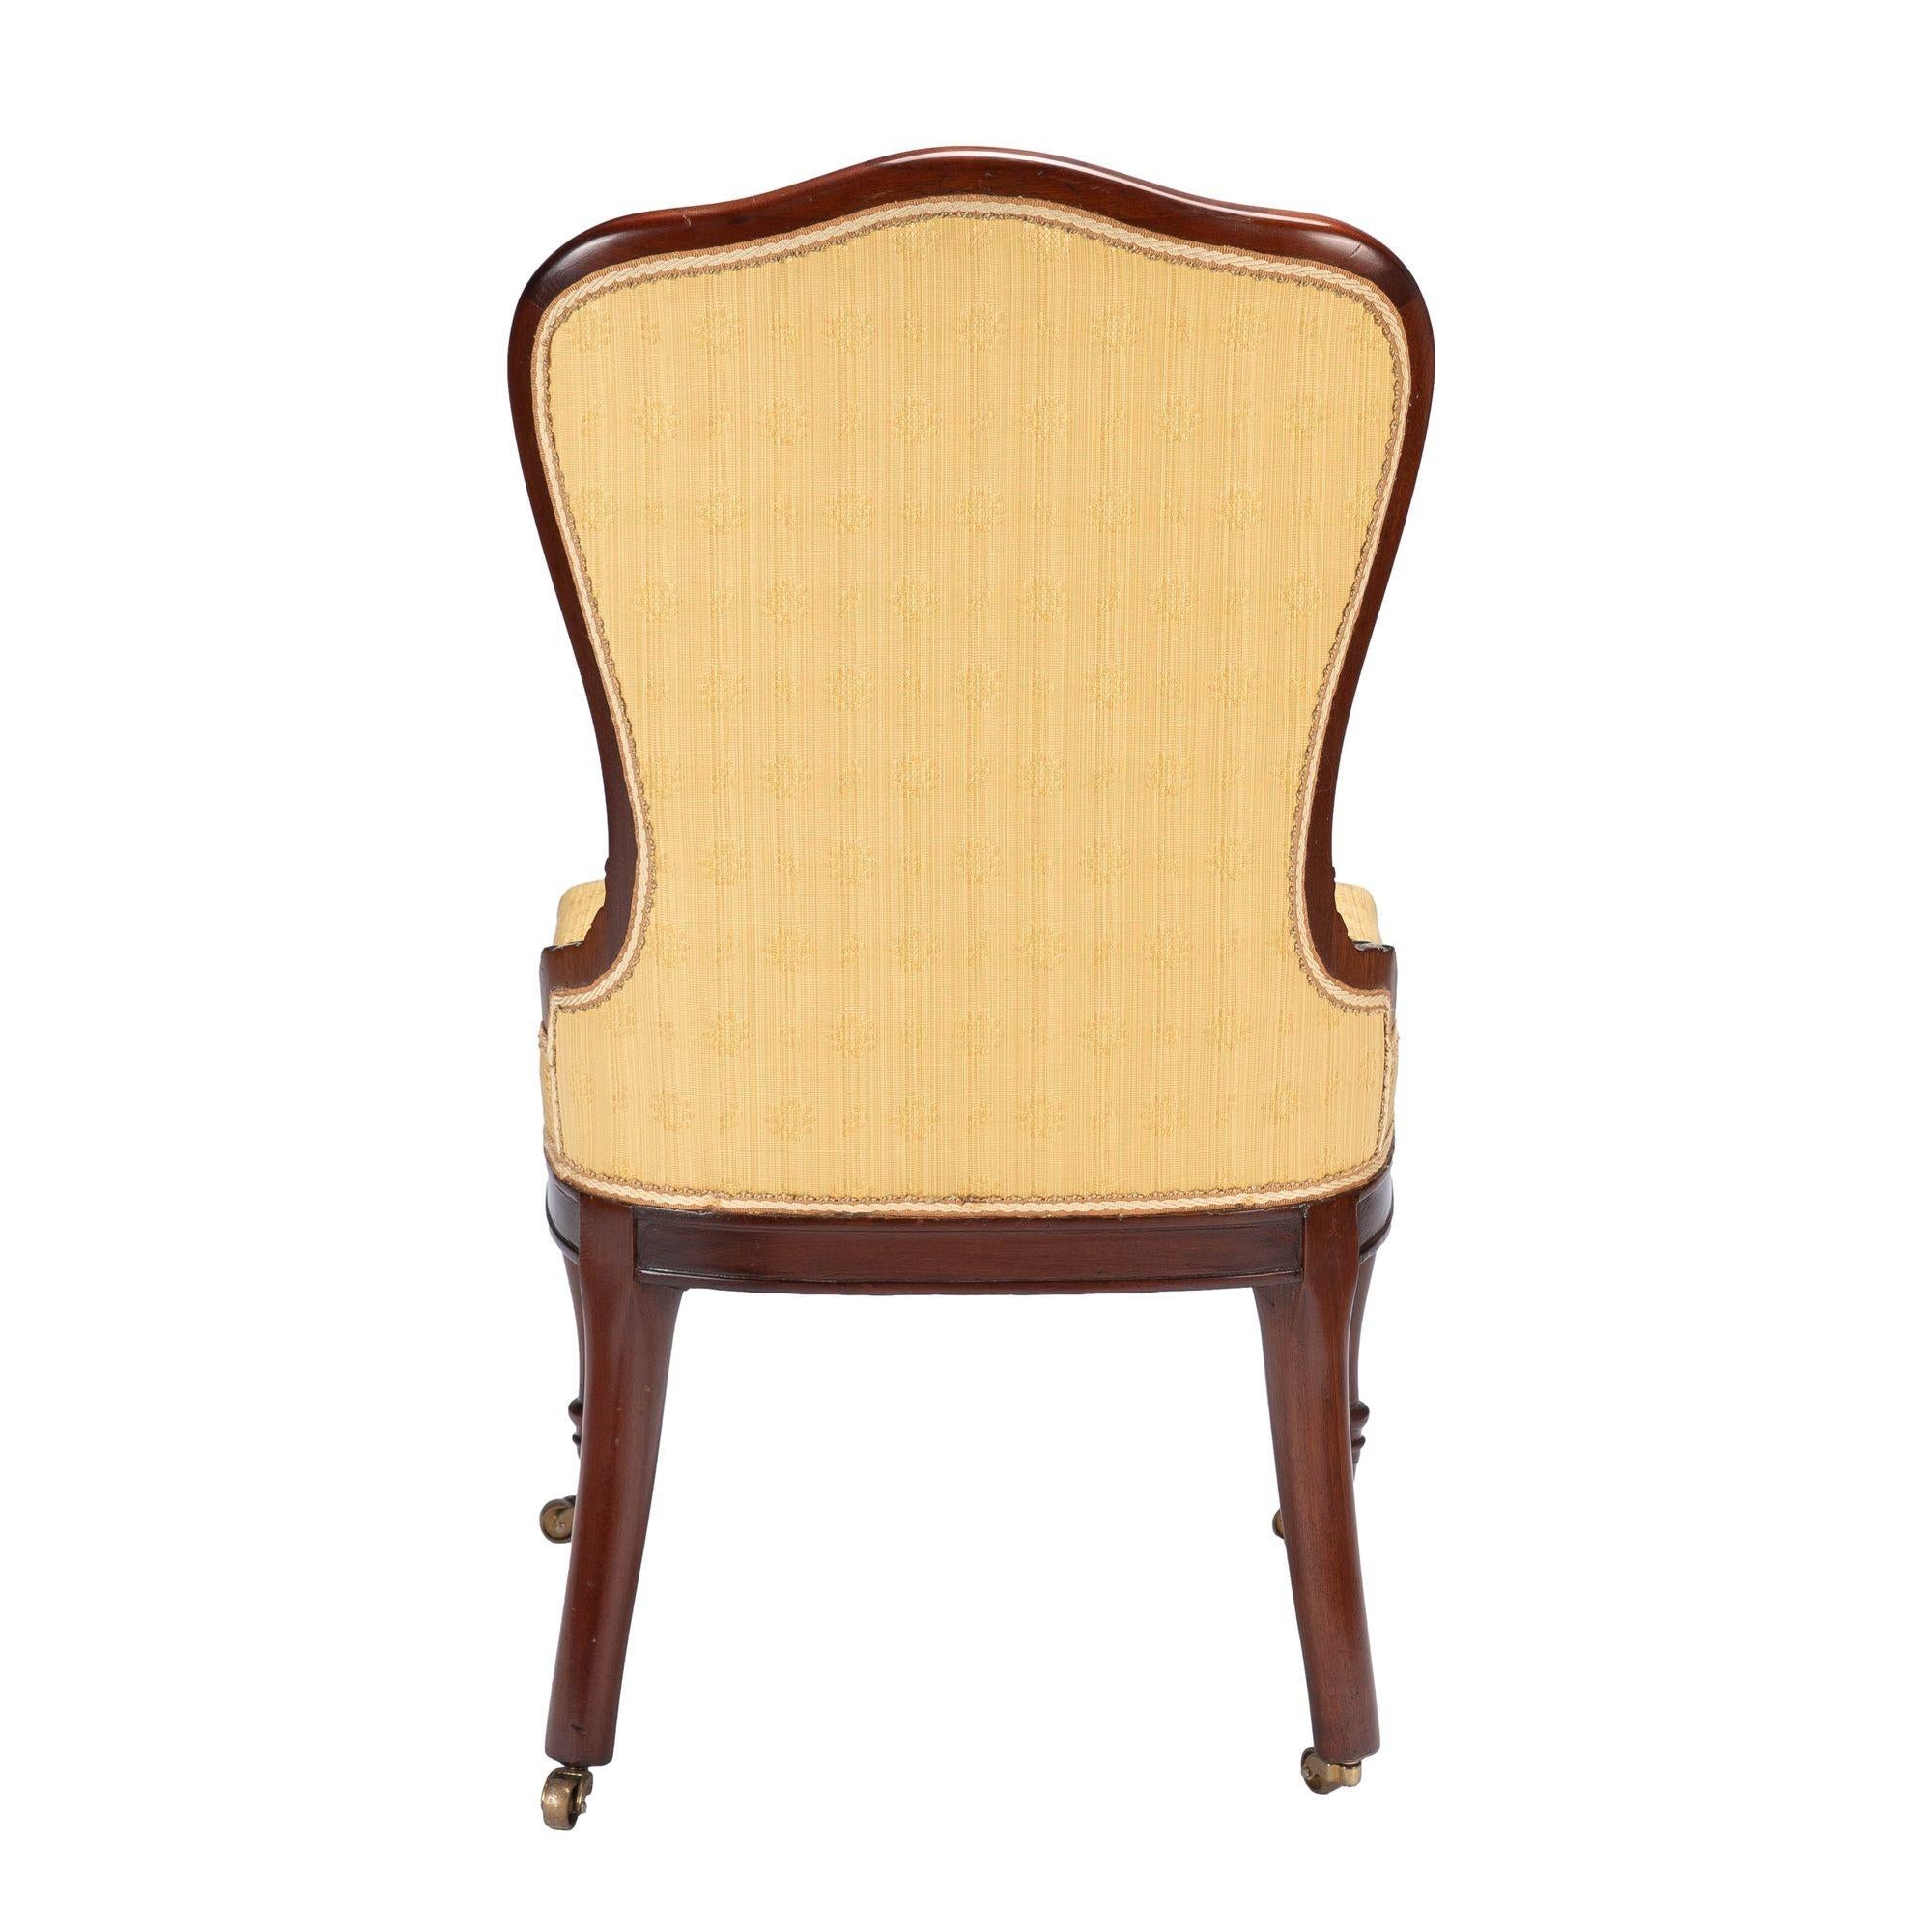 Baltimore Louis XVI Revival Upholstered Slipper Chair, '1850-75' In Excellent Condition For Sale In Kenilworth, IL